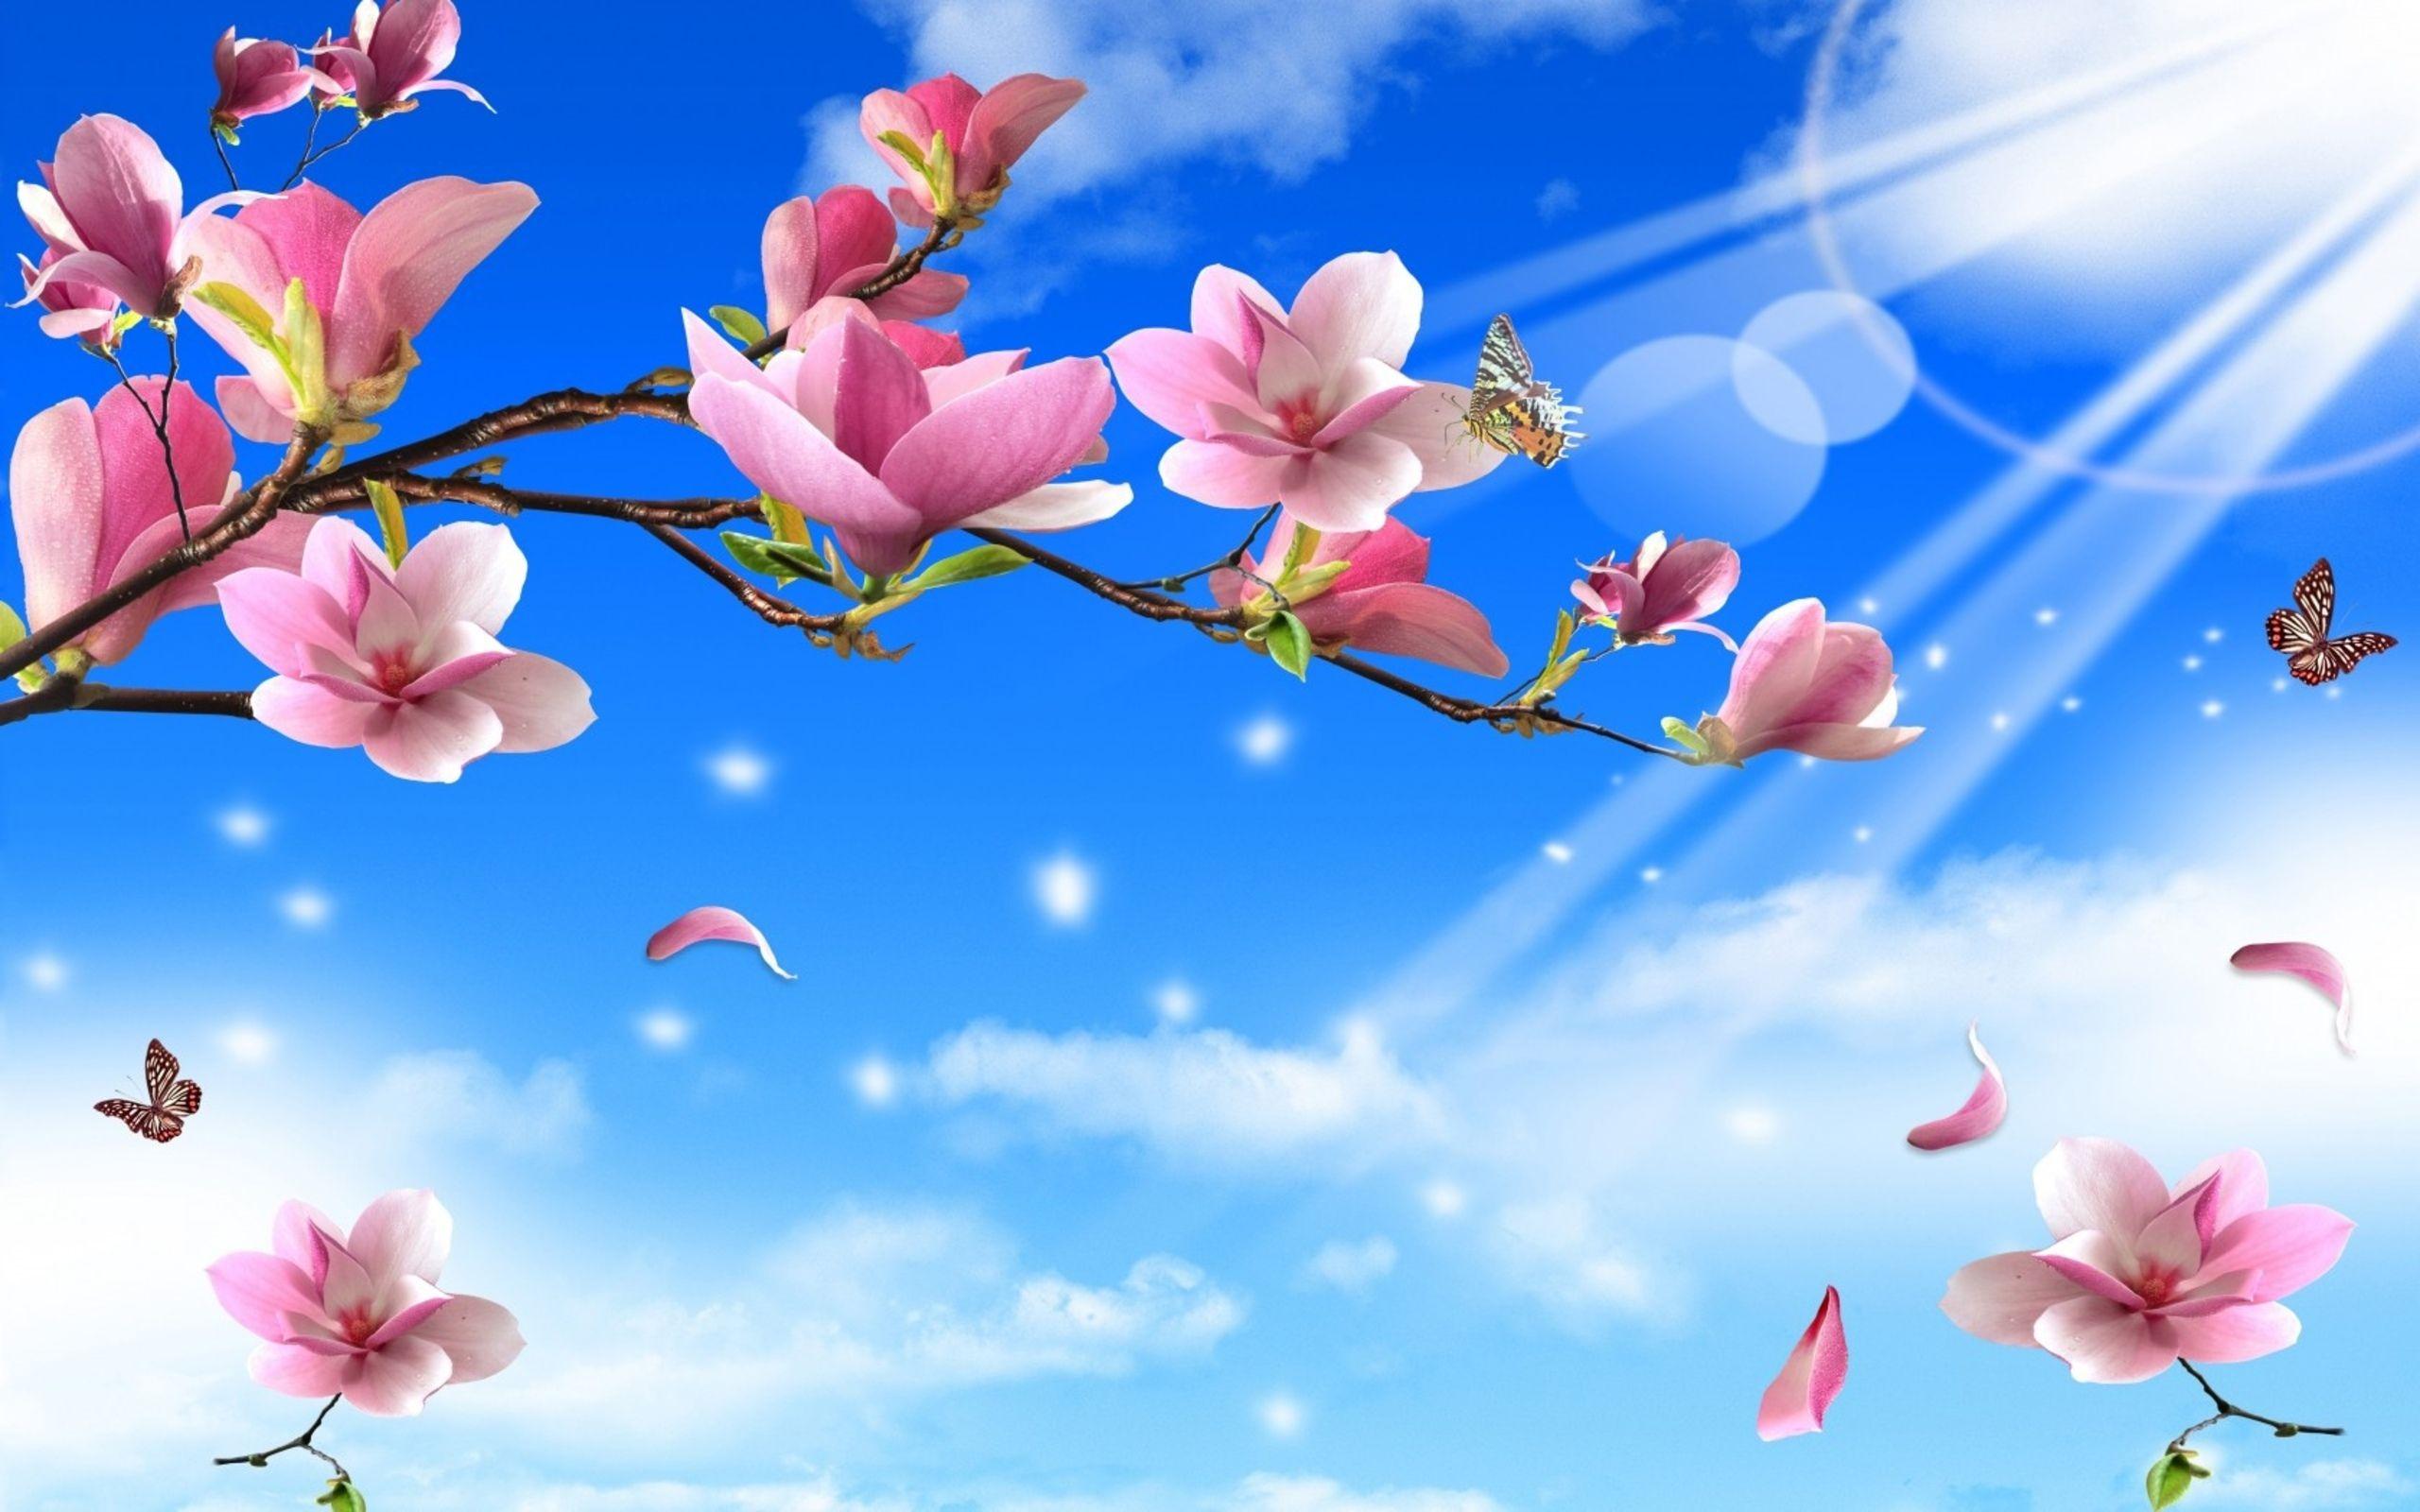 Spring Butterfly Wallpaper Free Spring Butterfly